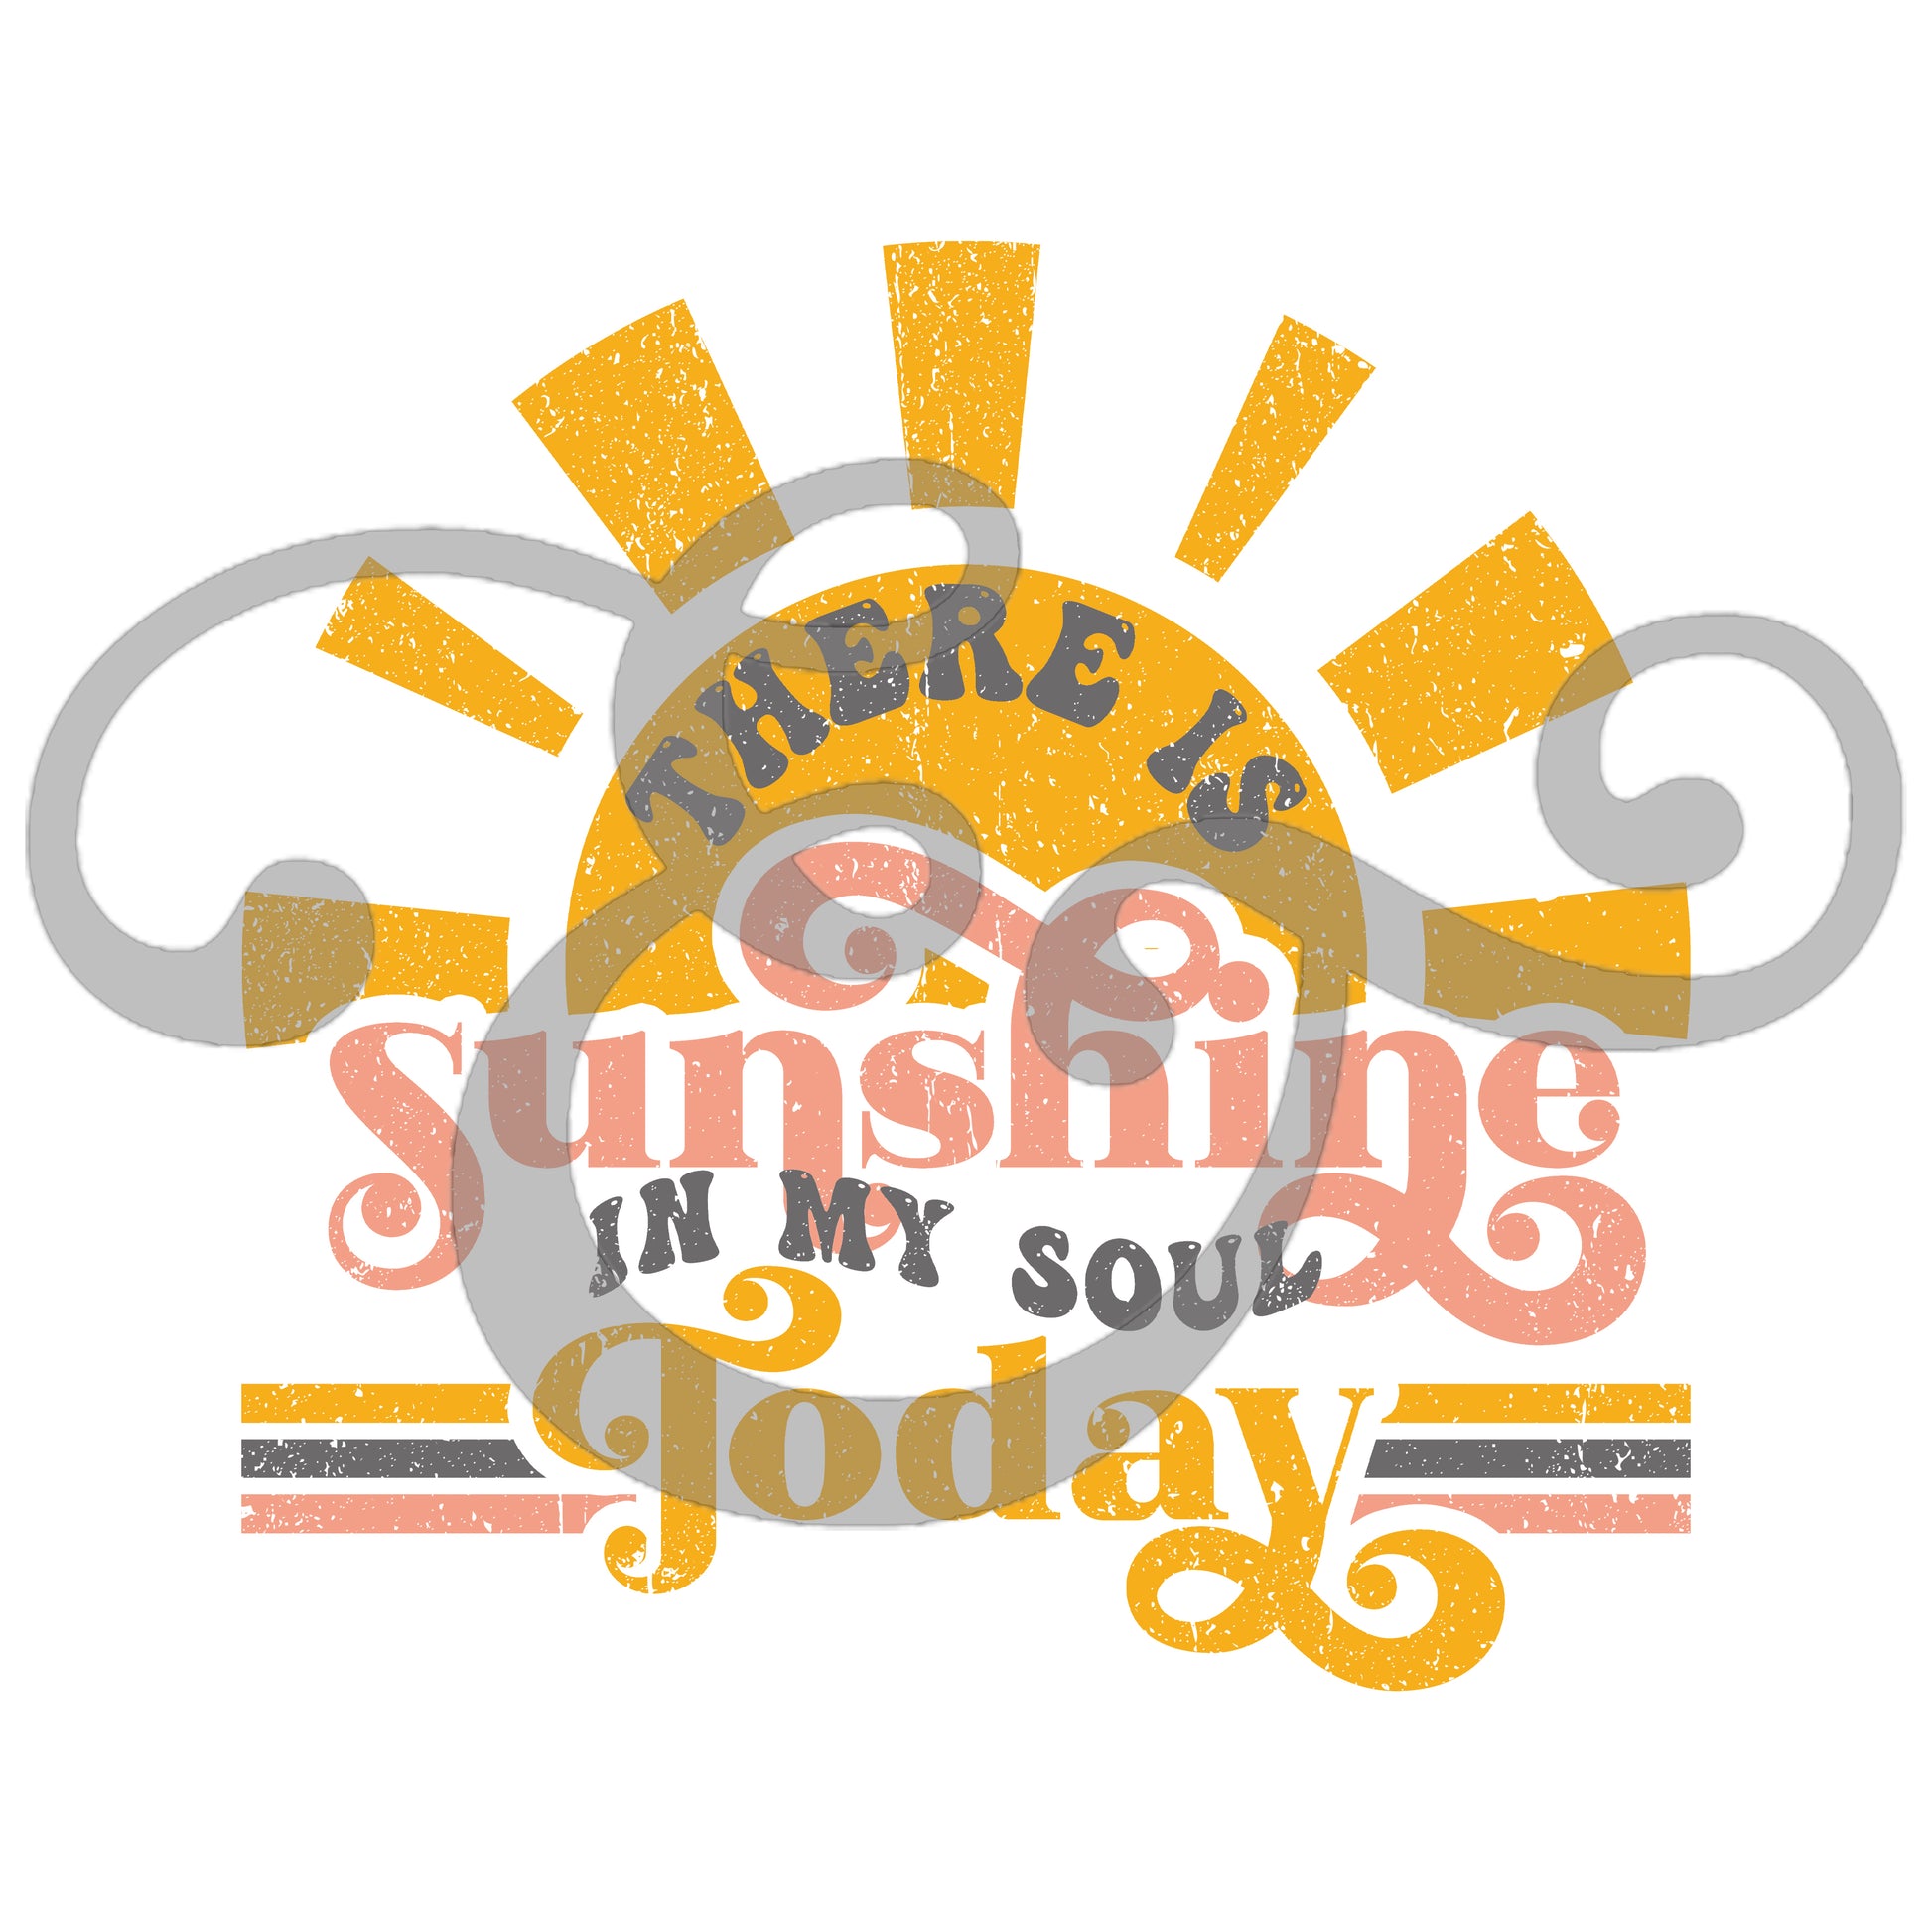 There Is Sunshine In My Soul Today Sublimation Transfer (6699578622030)